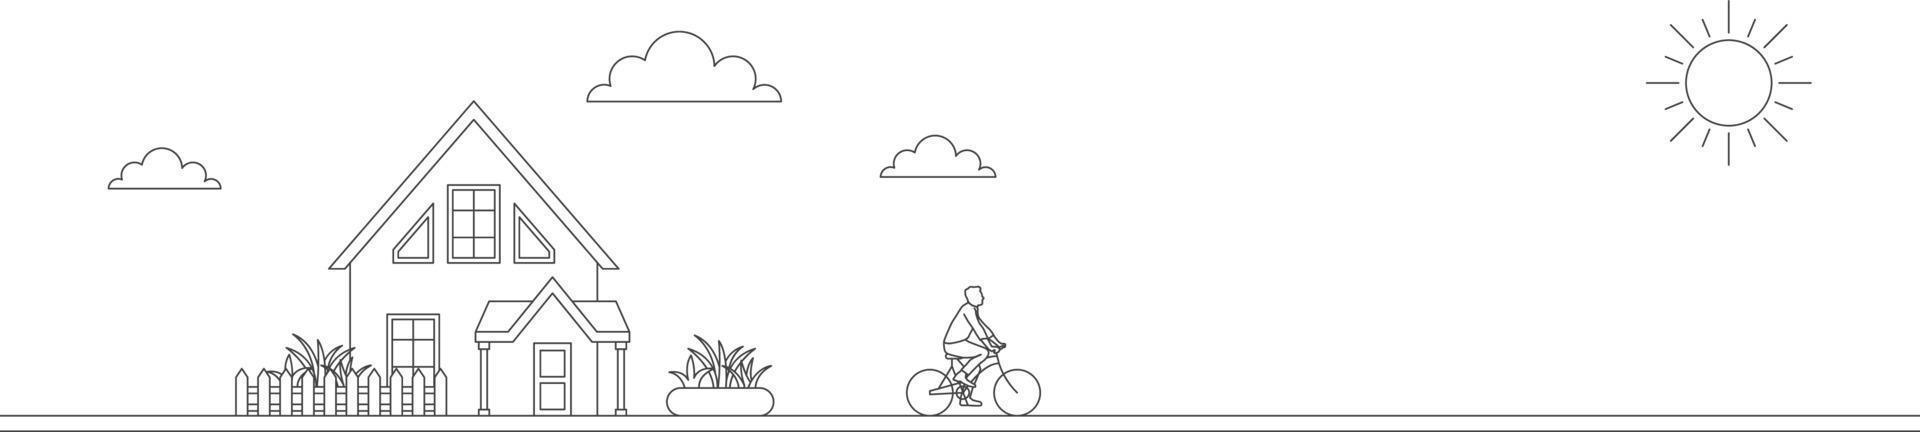 Eco city friendly Concept. Men are cycling in the lawn. Men goes to work with bike line vector illustration.